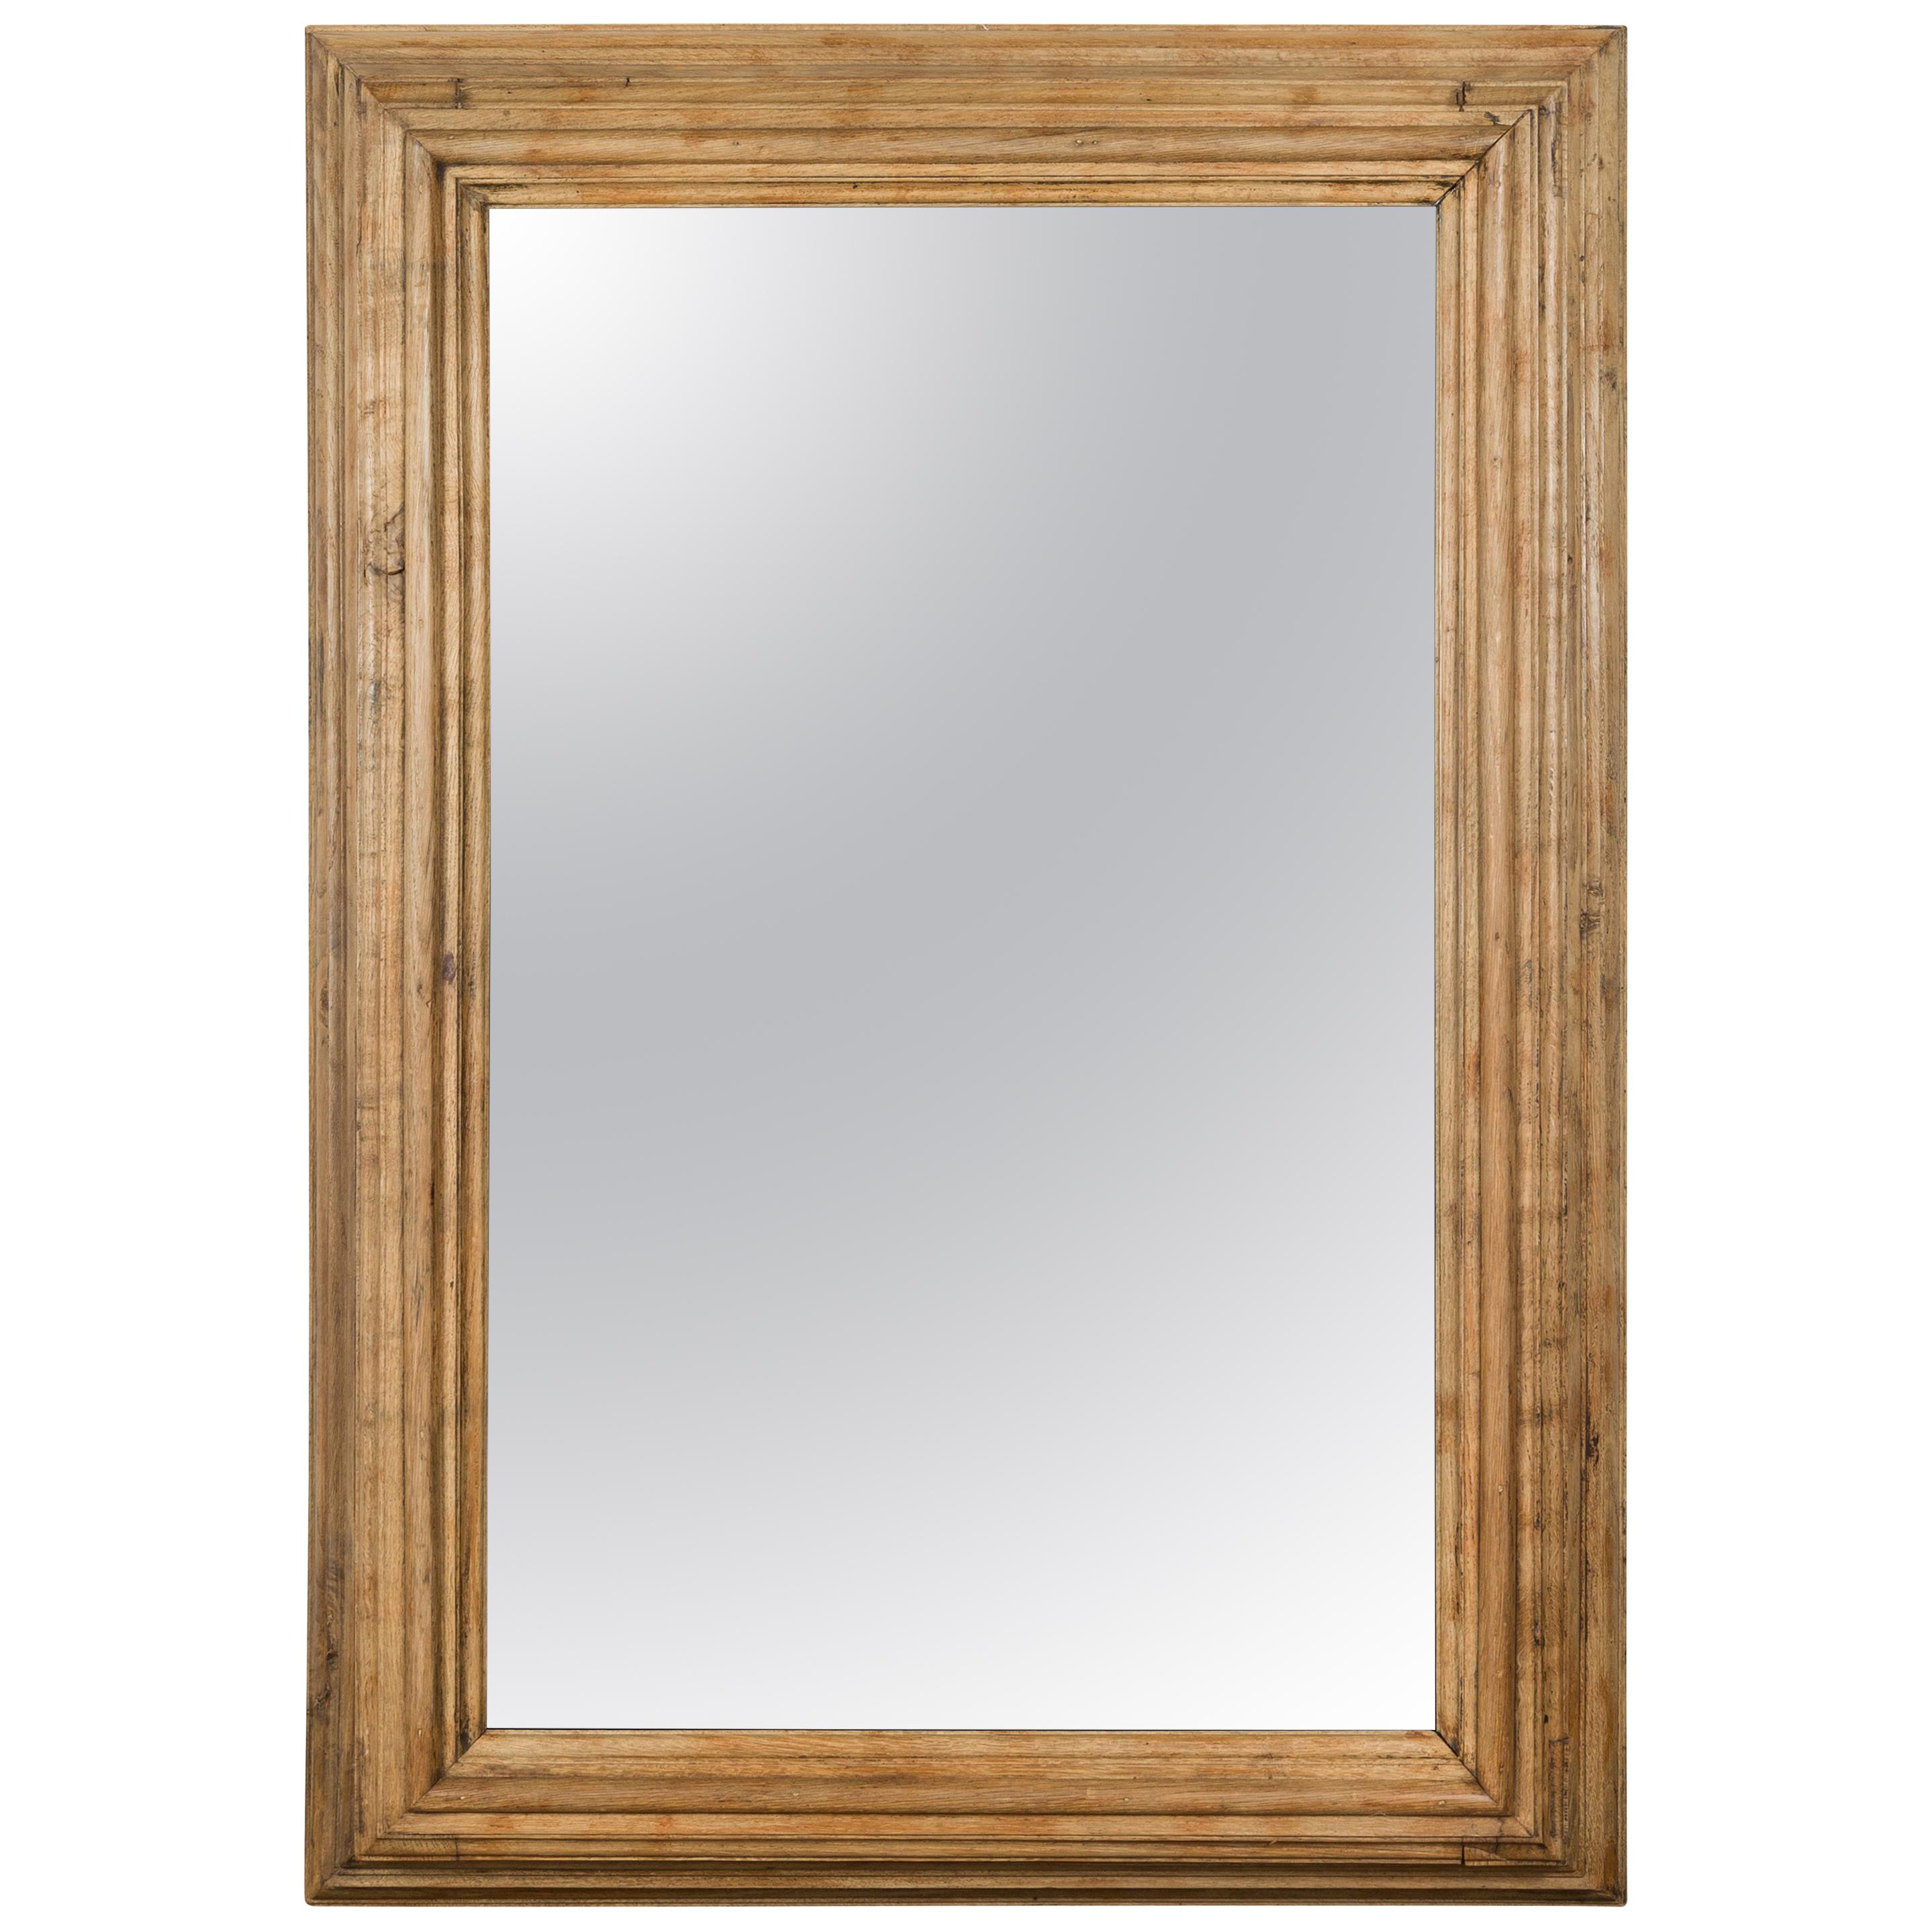 English 1880s Rustic Oak Mirror with Molded Frame and Natural Finish